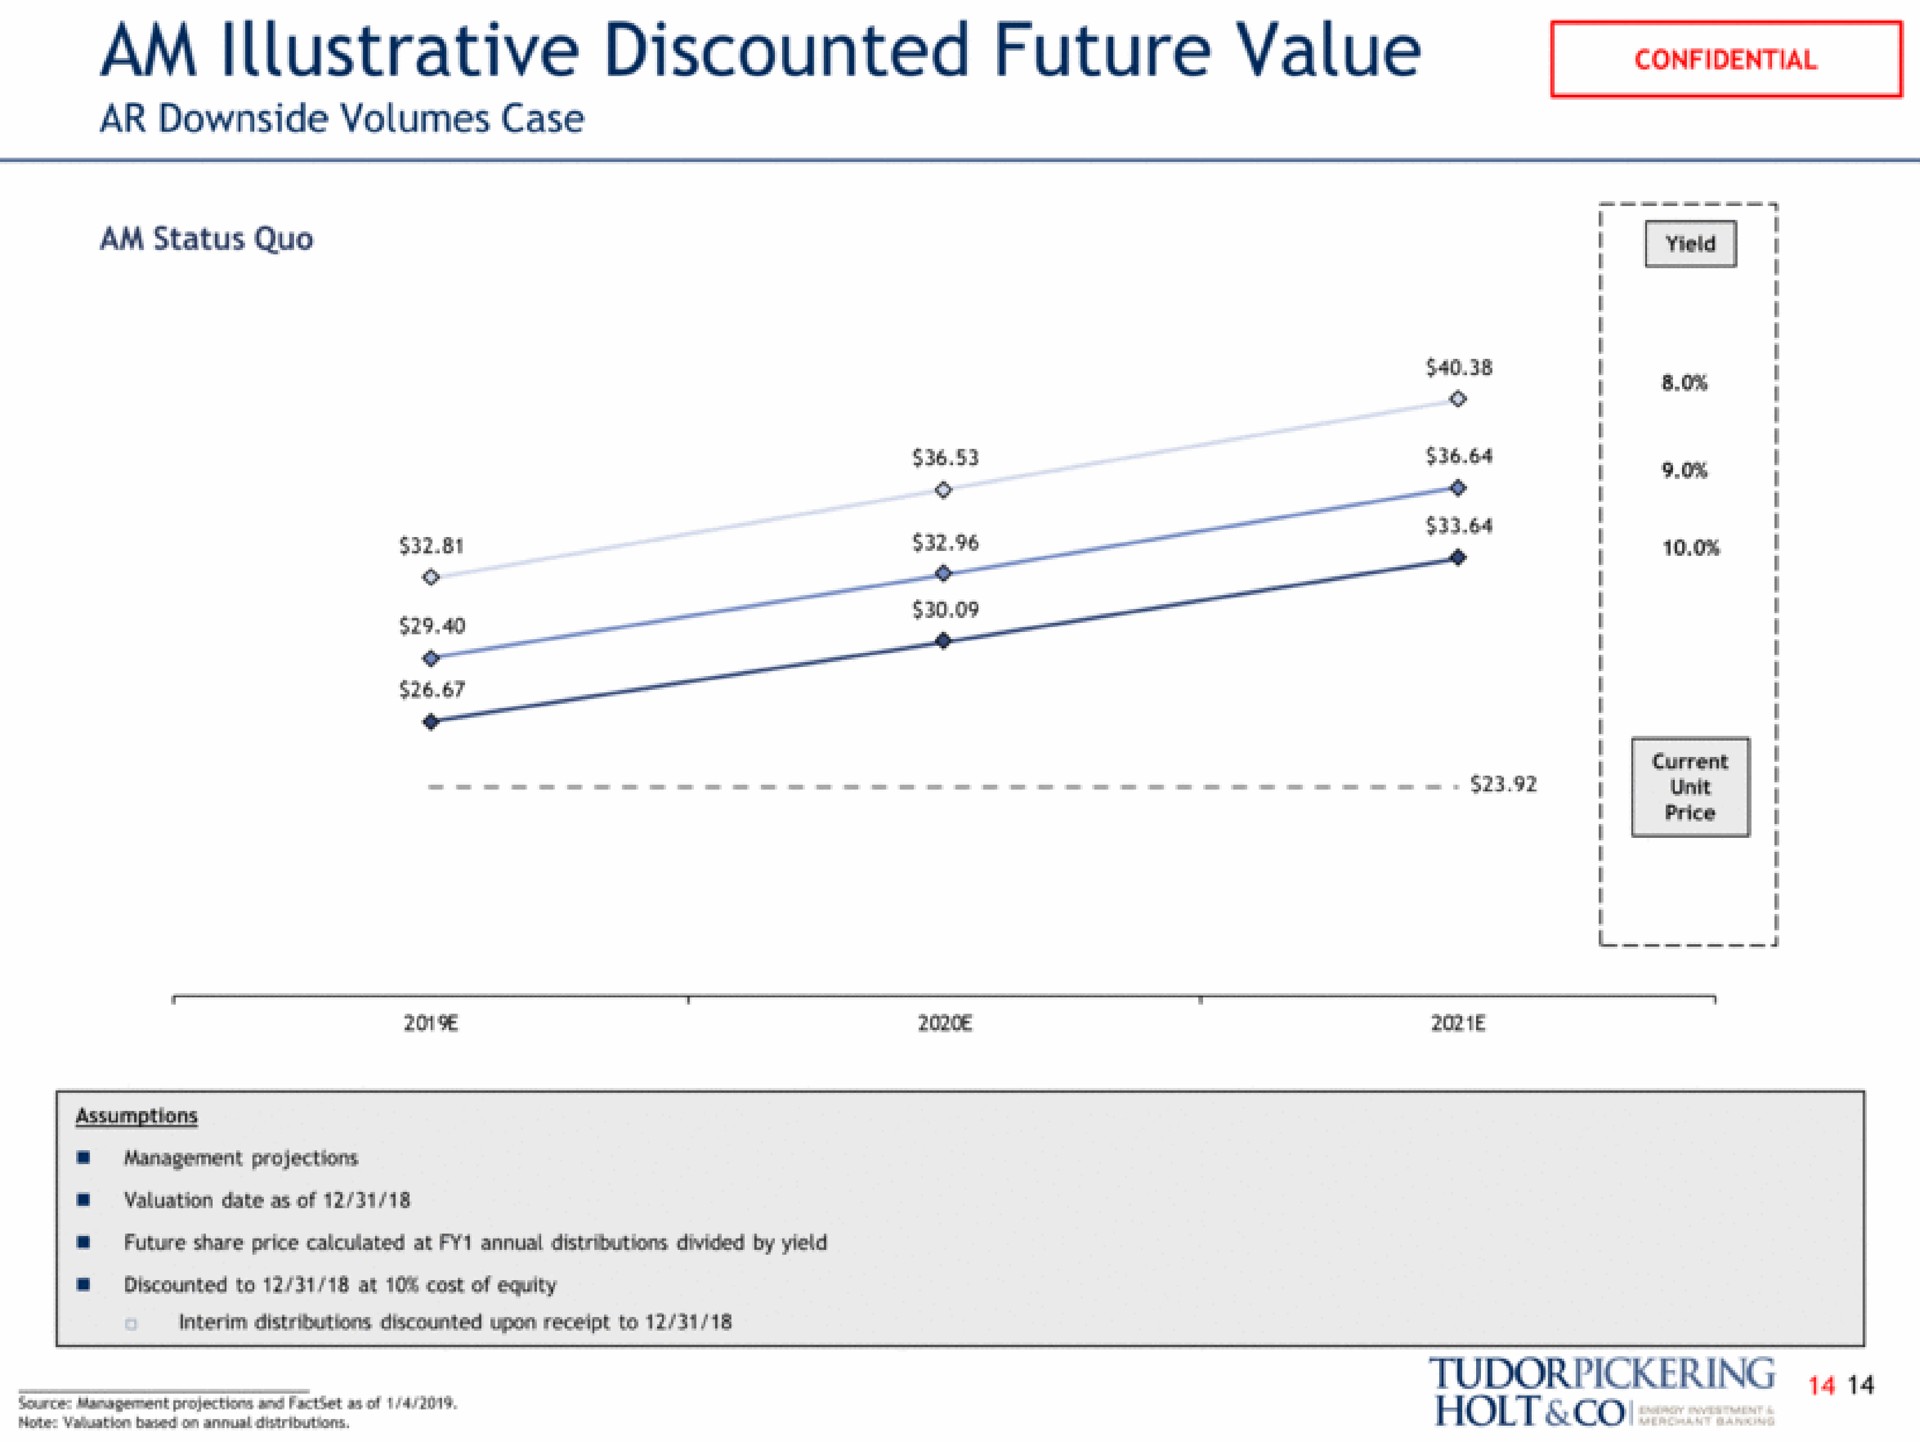 am illustrative discounted future value note on holt | Tudor, Pickering, Holt & Co